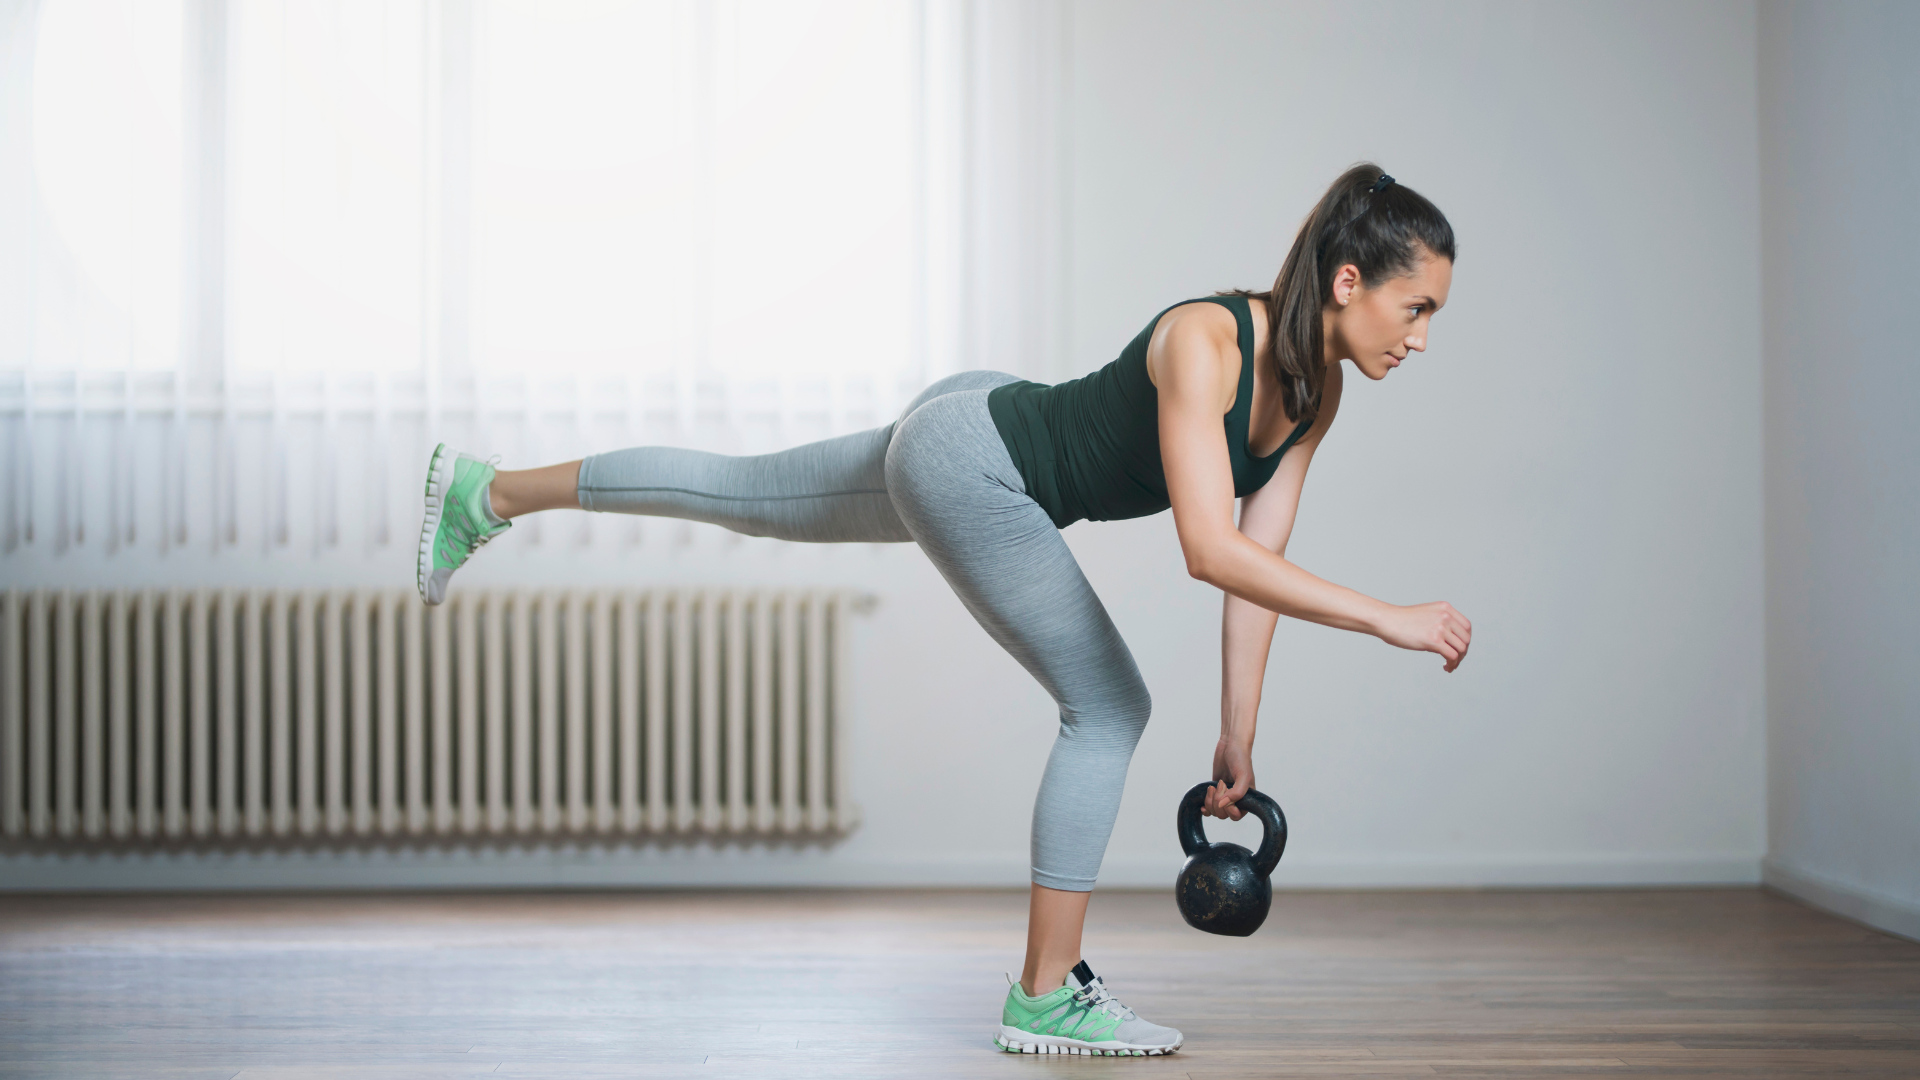 5 exercises better than deadlifts to strengthen your hamstrings